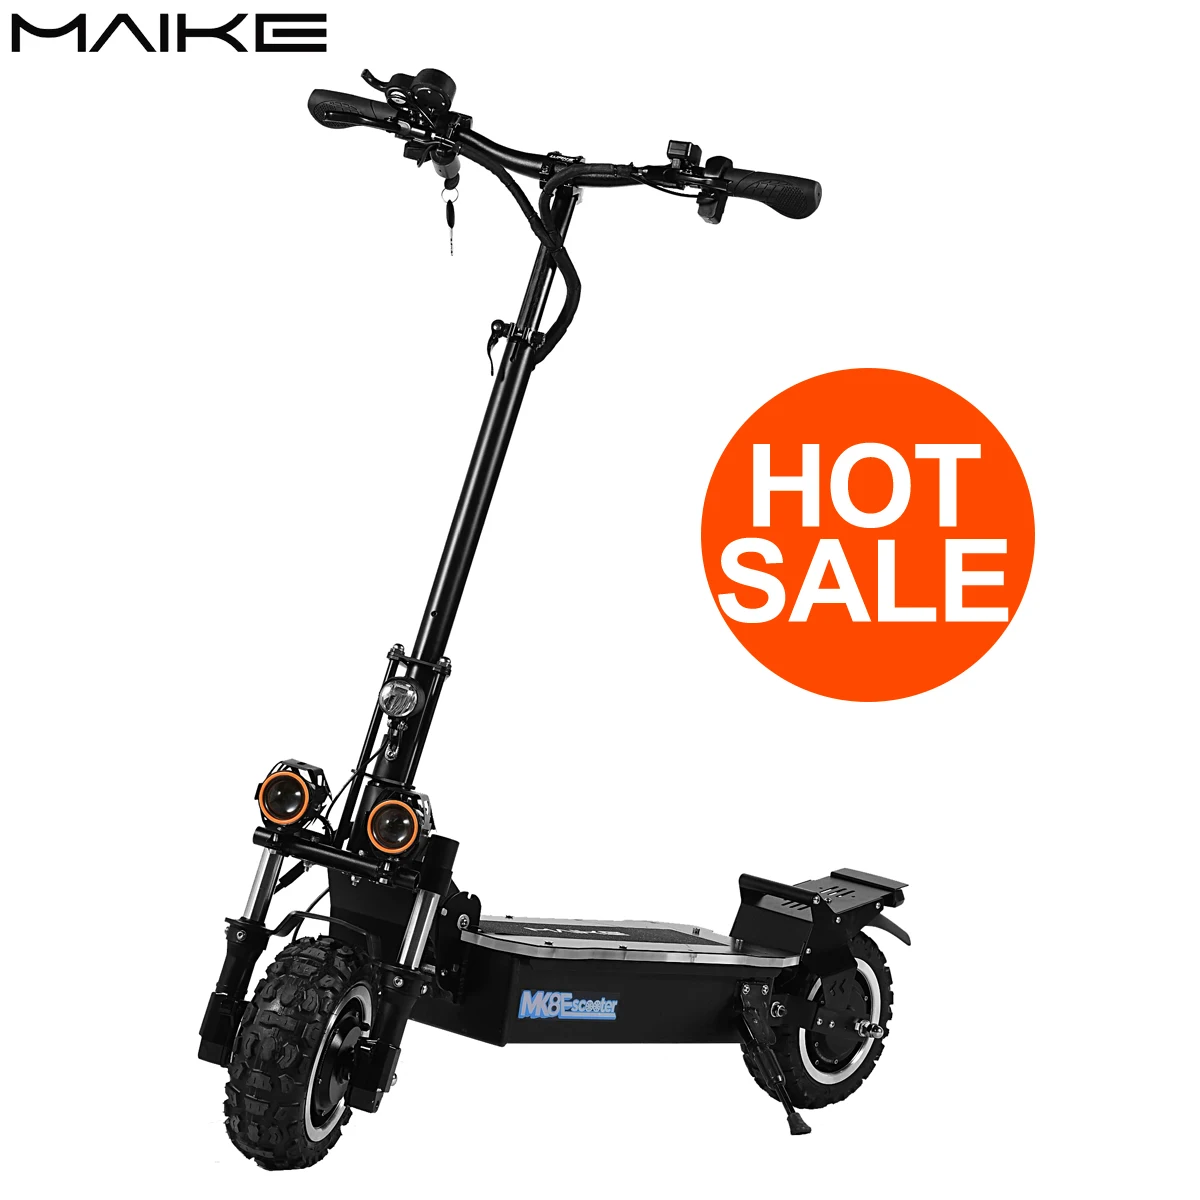 

Maike MK8 3200w off road electric scooter dual motor scooter electric adult foldable